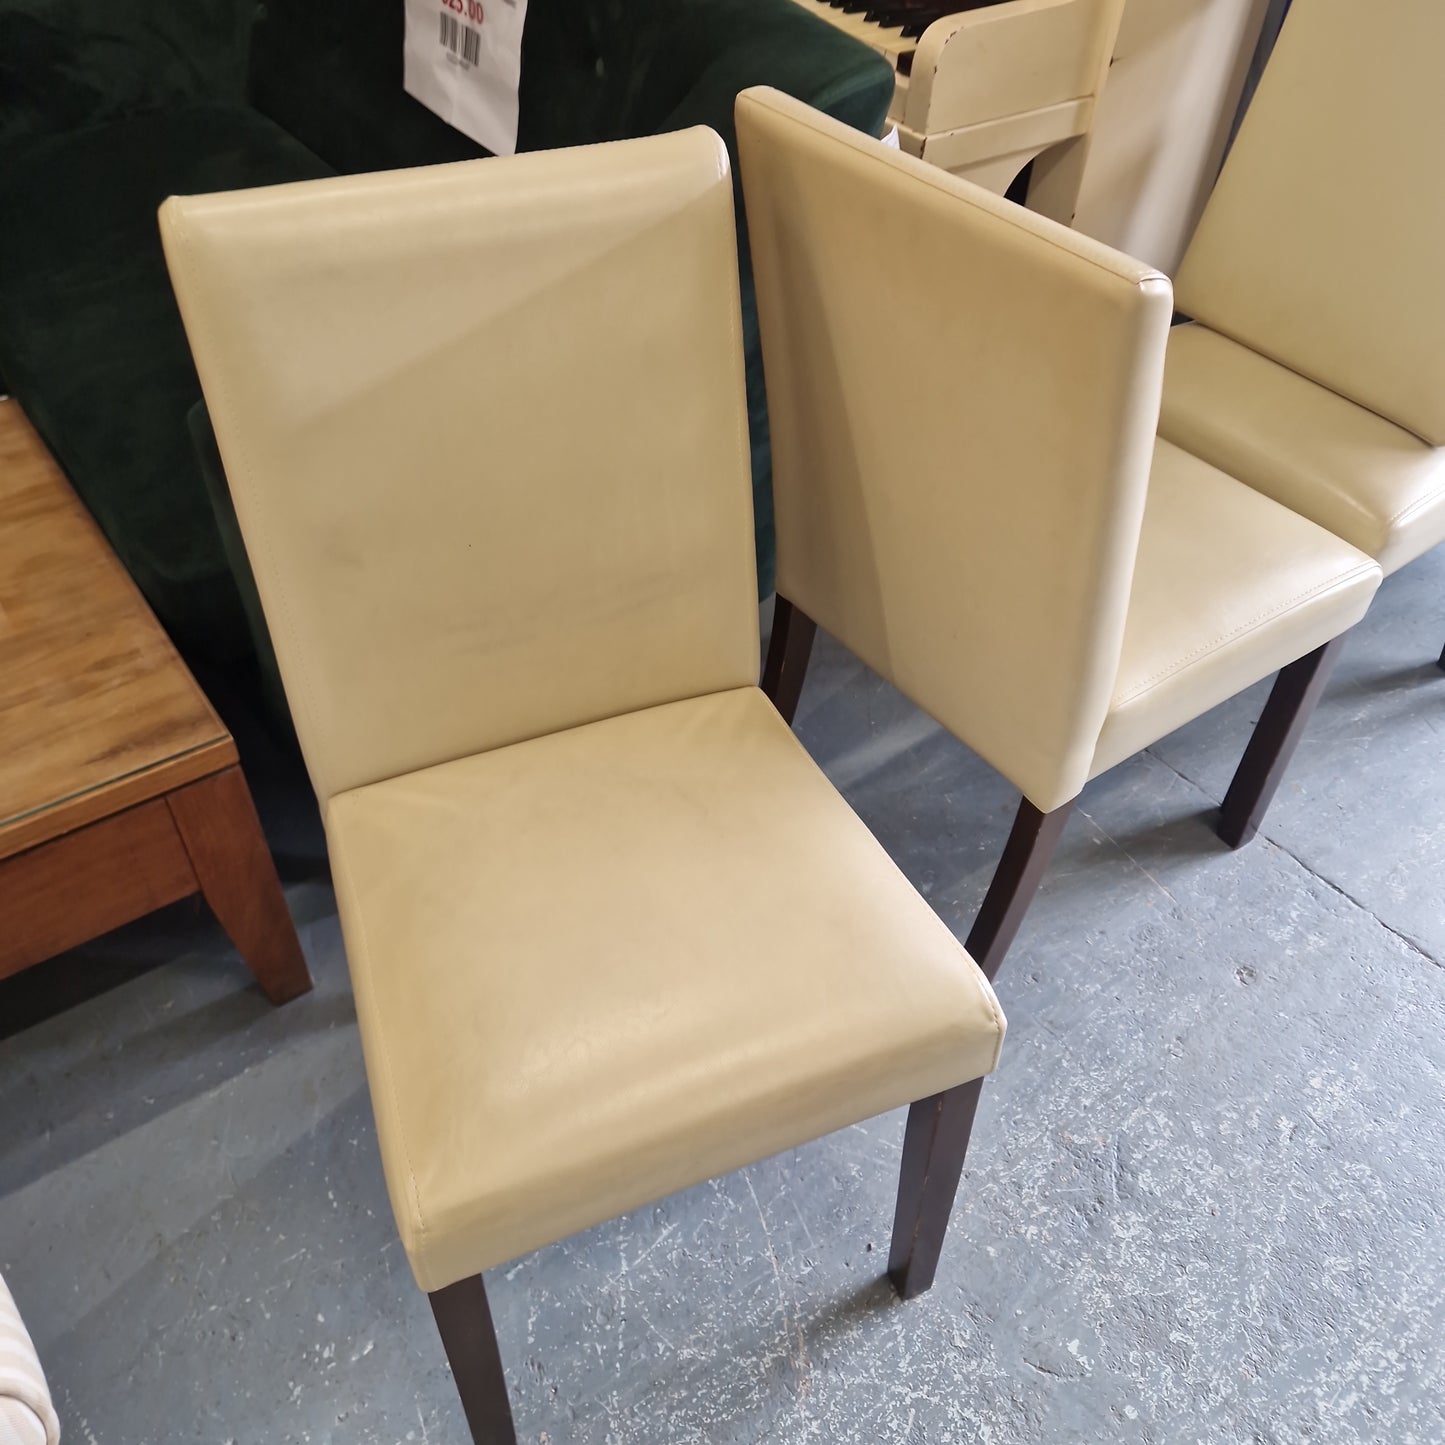 Cream leatherette dining chairs